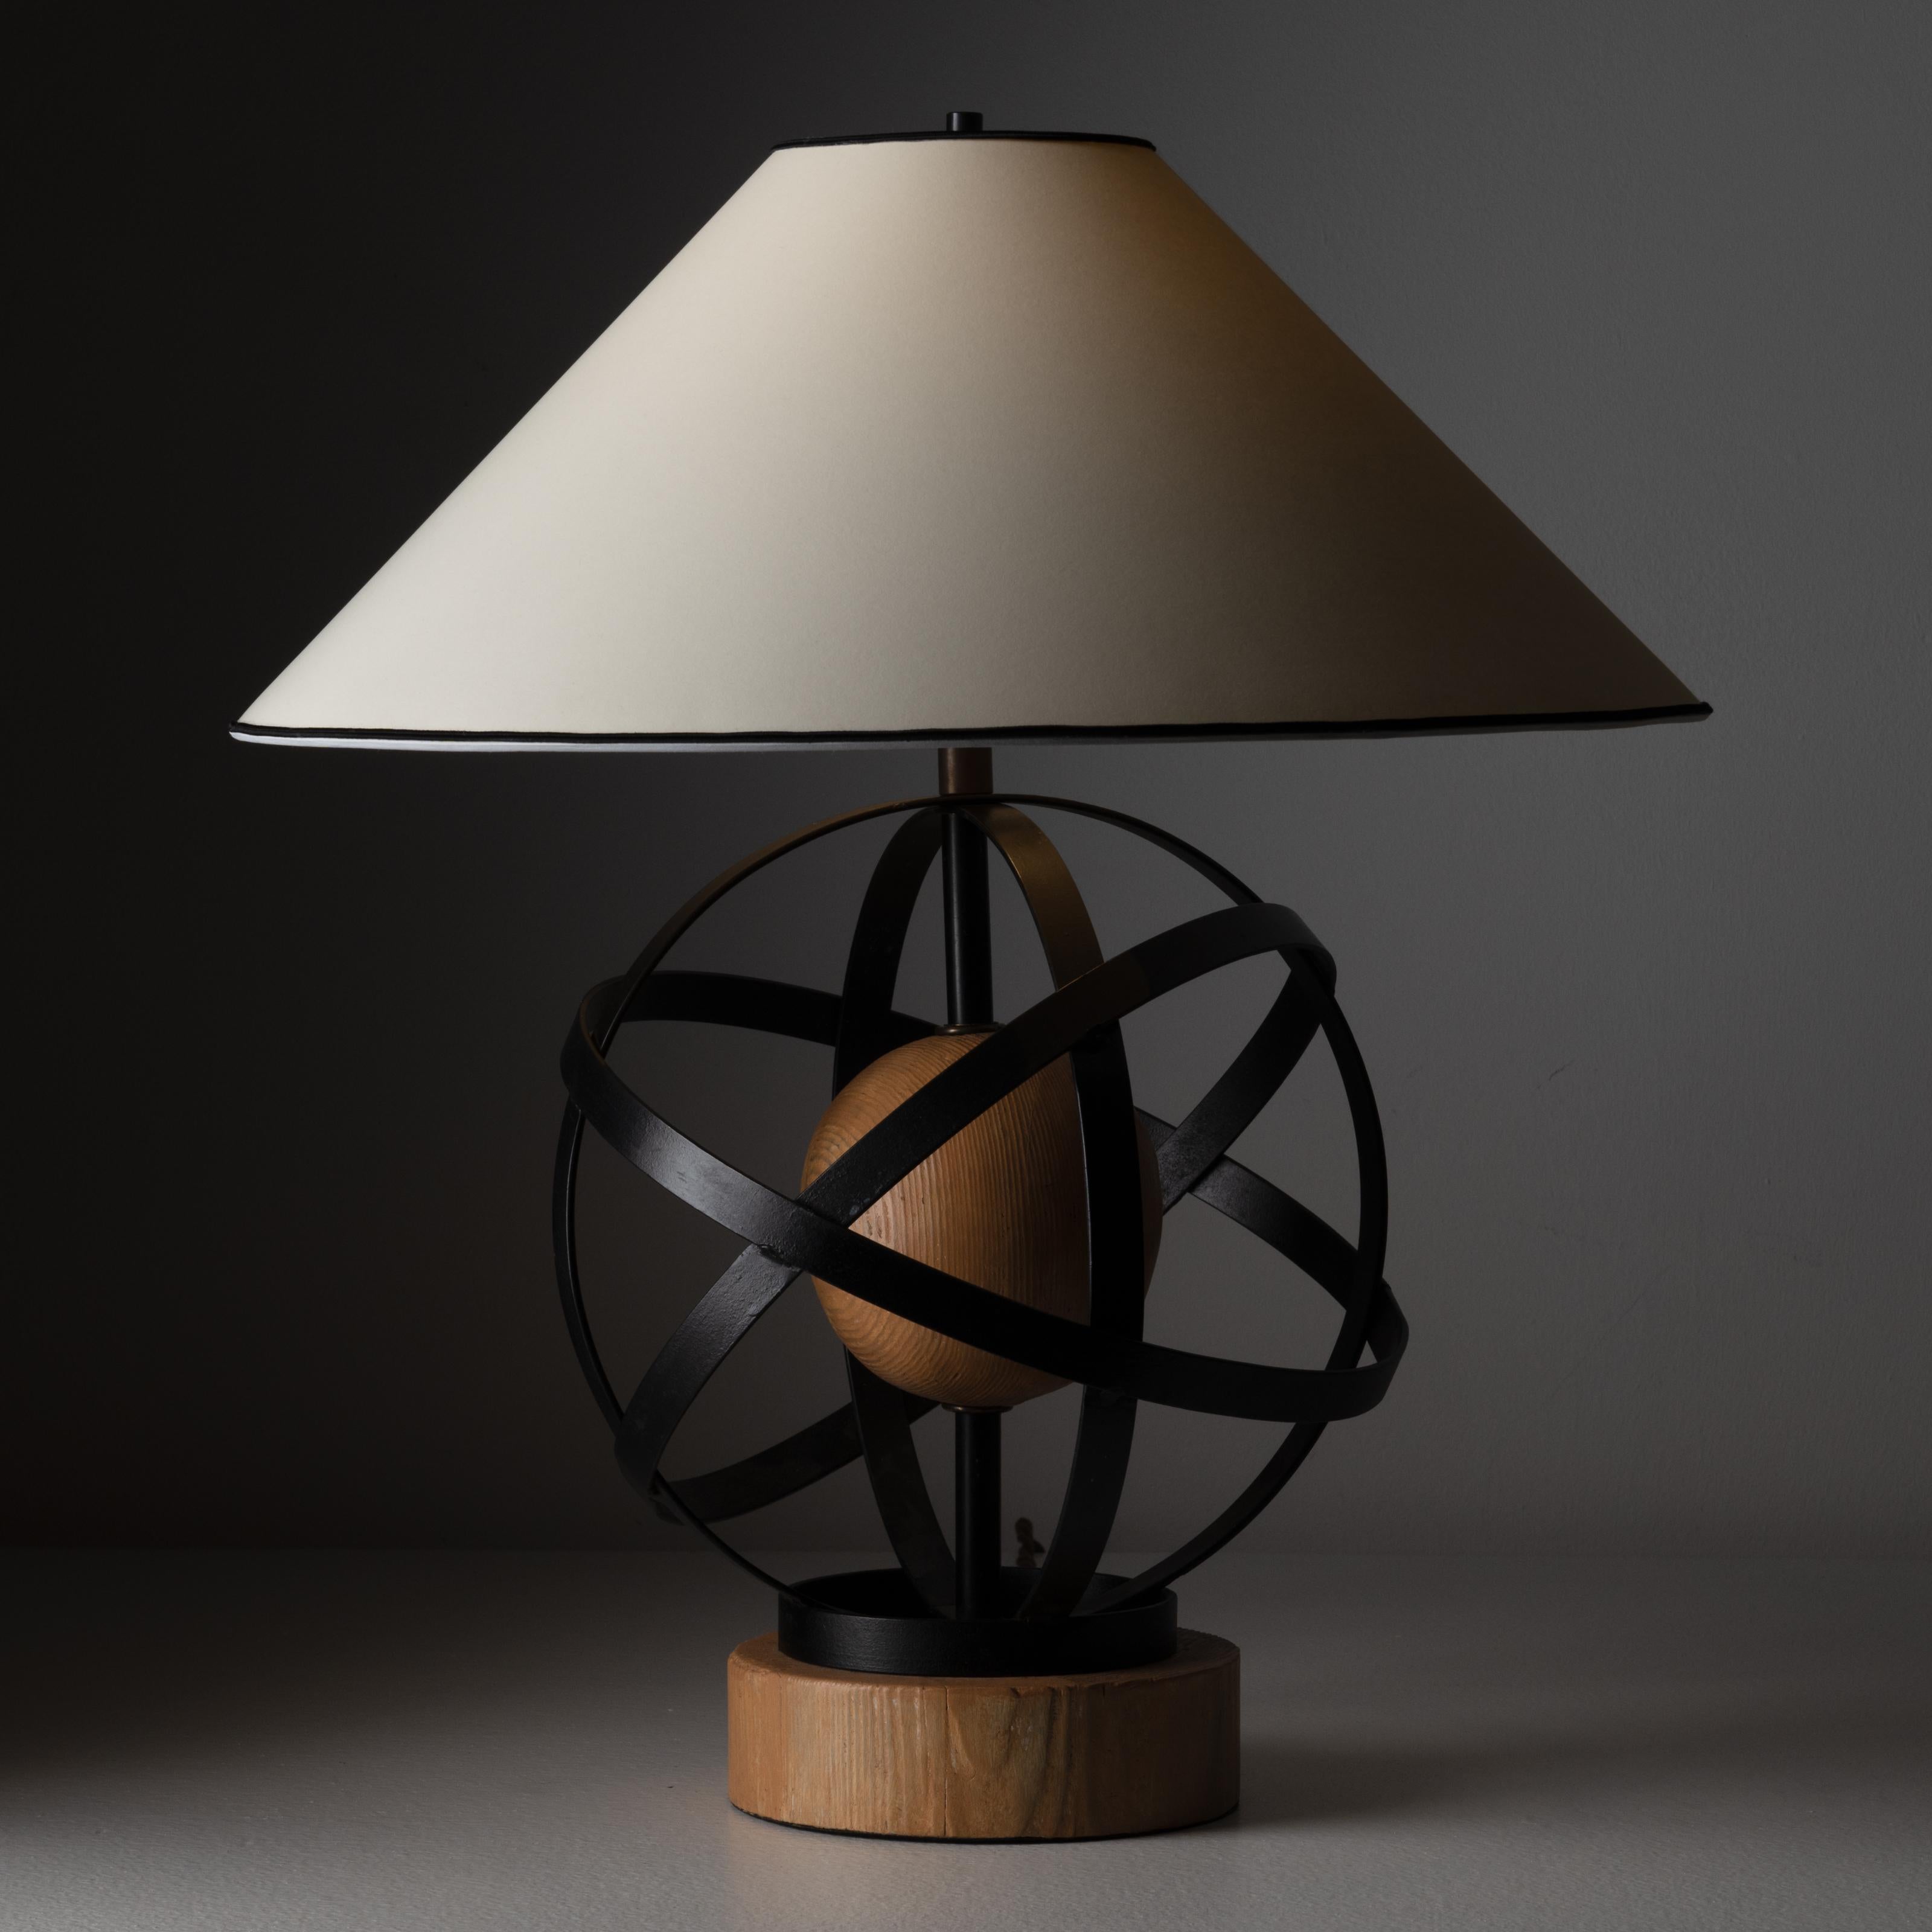 Table lamp by Heifetz. Designed and manufactured in the United States, circa 1950. Wood and iron table lamp, possessing an almost molecular shape of wrapped iron, with a sturdy wooden base. The shade is a newly fabricated off-white linen with a